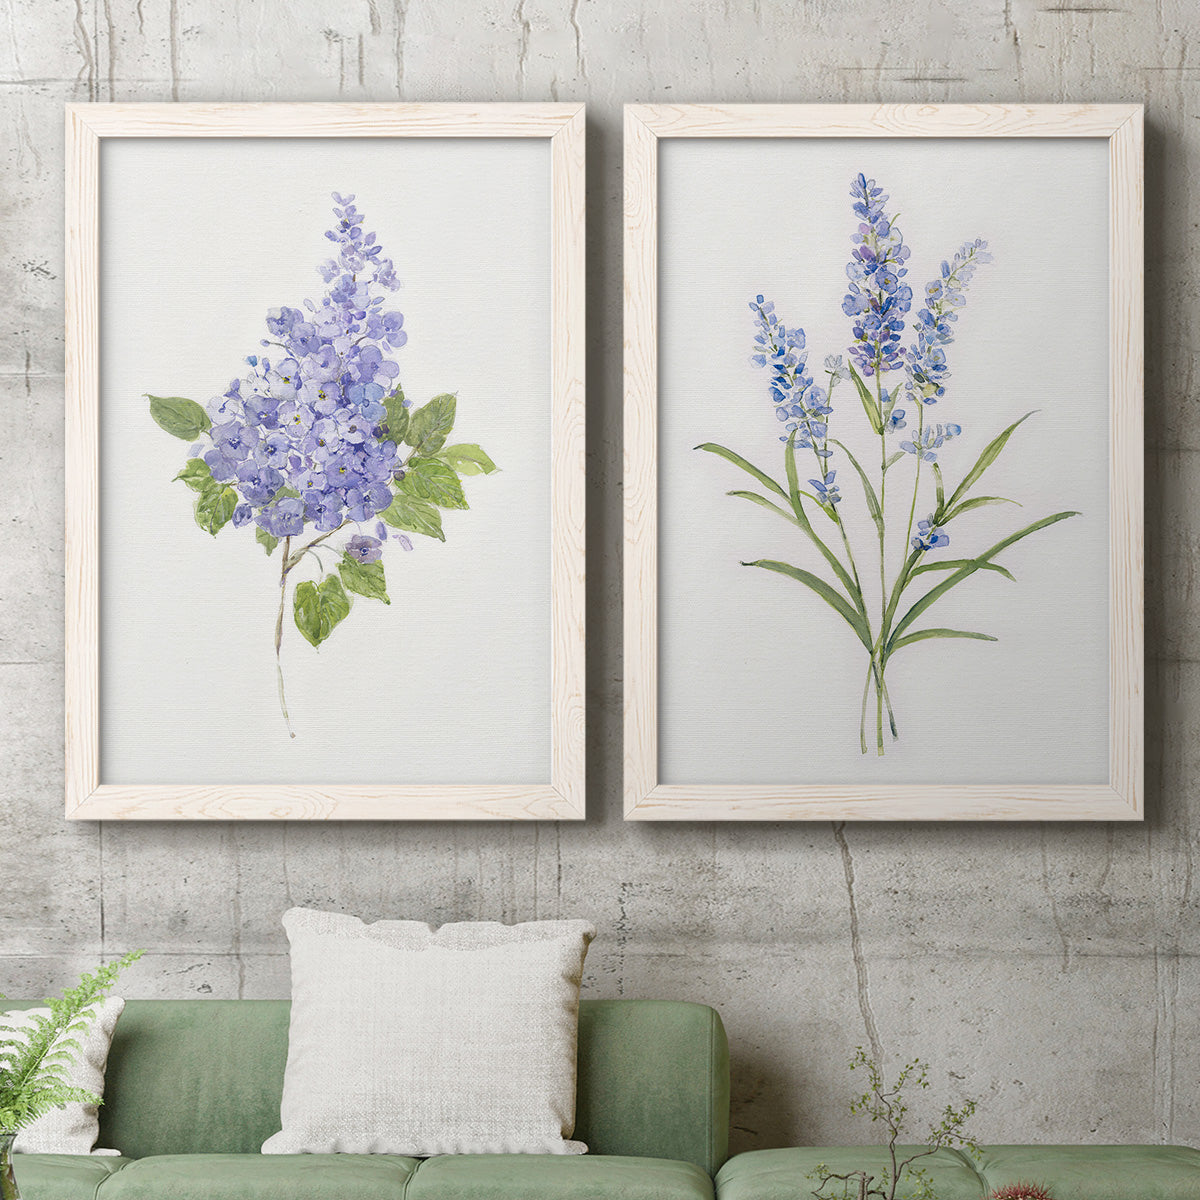 Dainty Botanical Lilac - Premium Framed Canvas 2 Piece Set - Ready to Hang